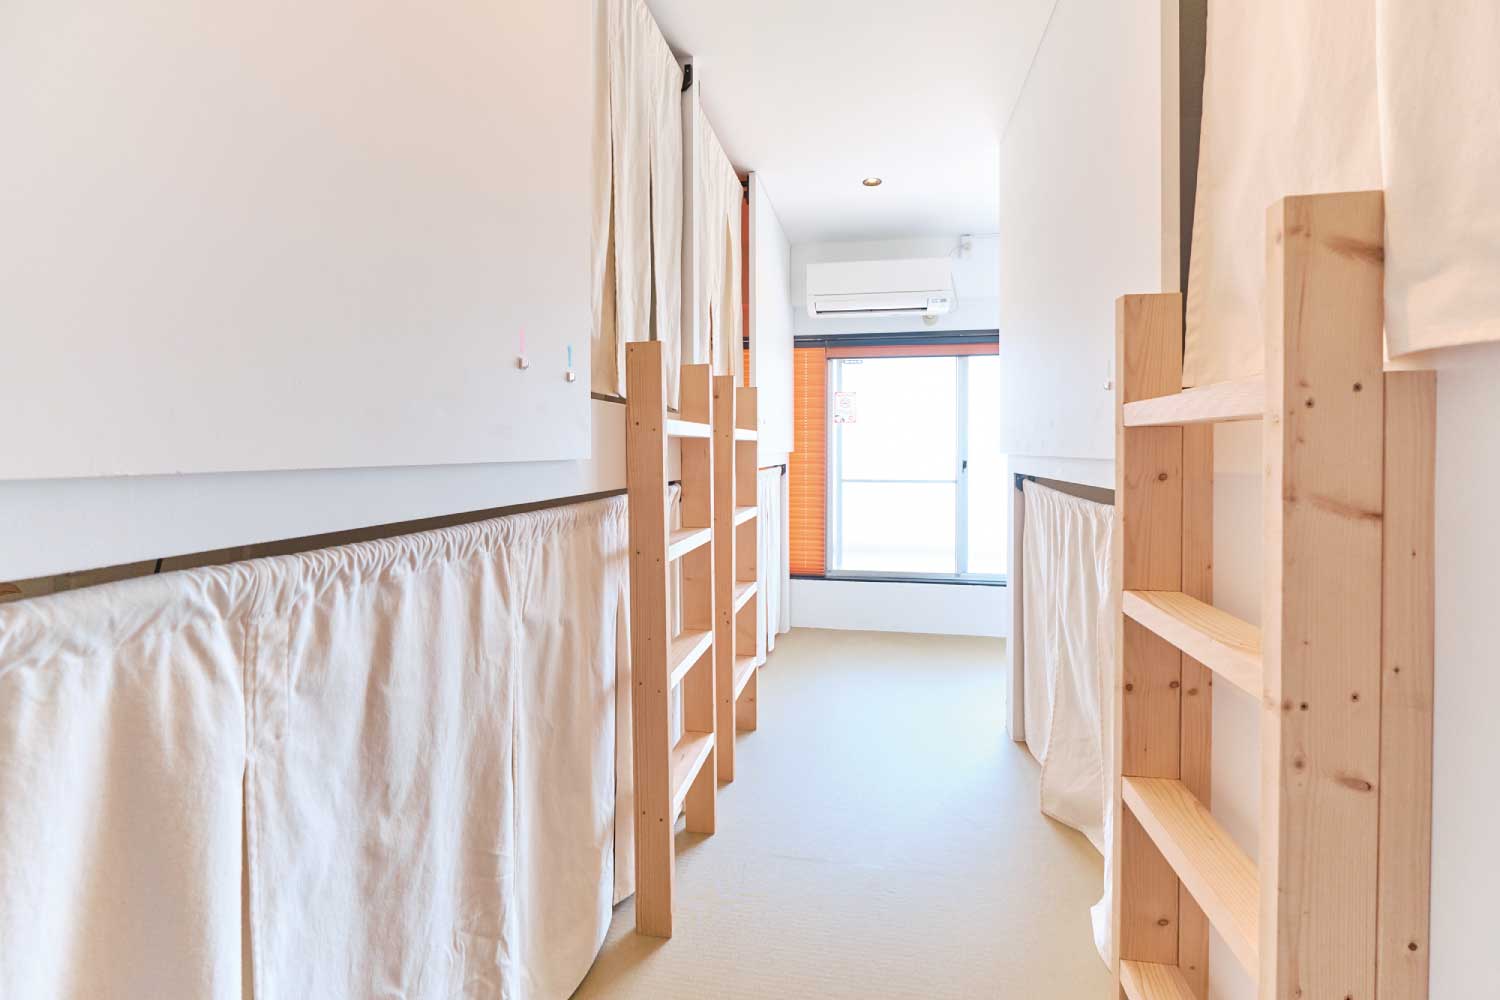 6-Bed Female Dormitory with Shared Bathroom